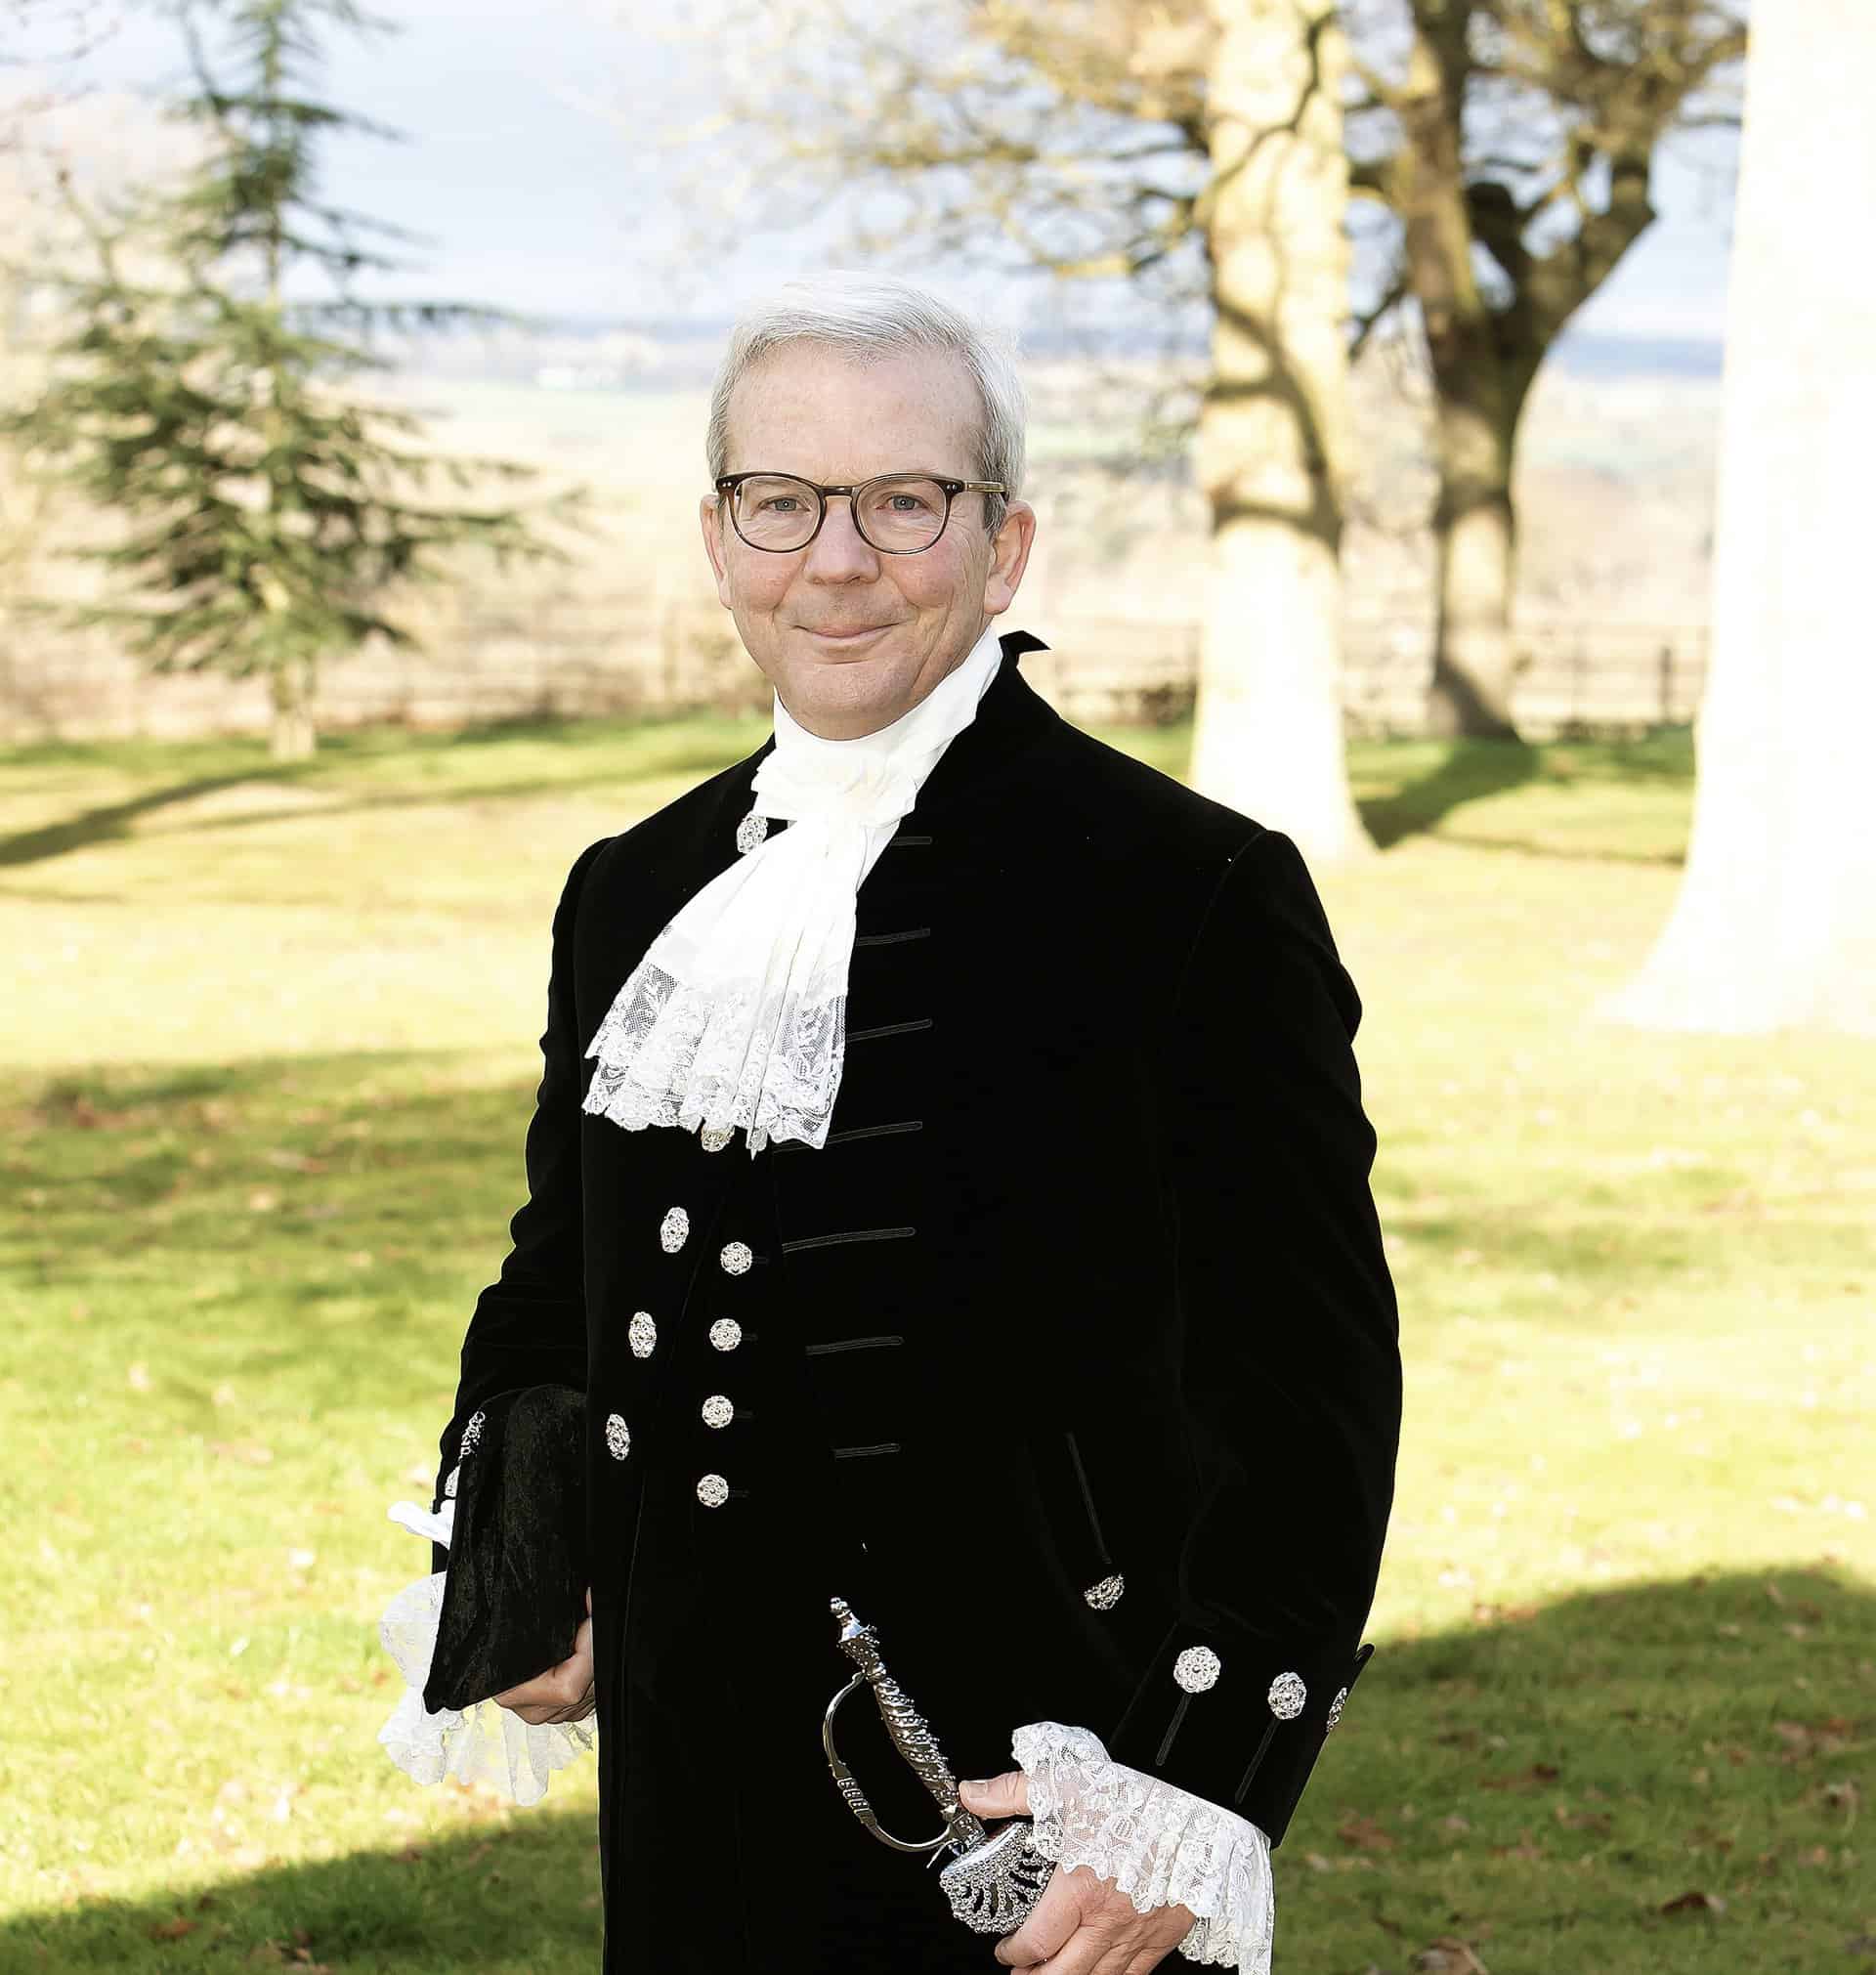 Featured image for “New High Sheriff of Essex appointed”